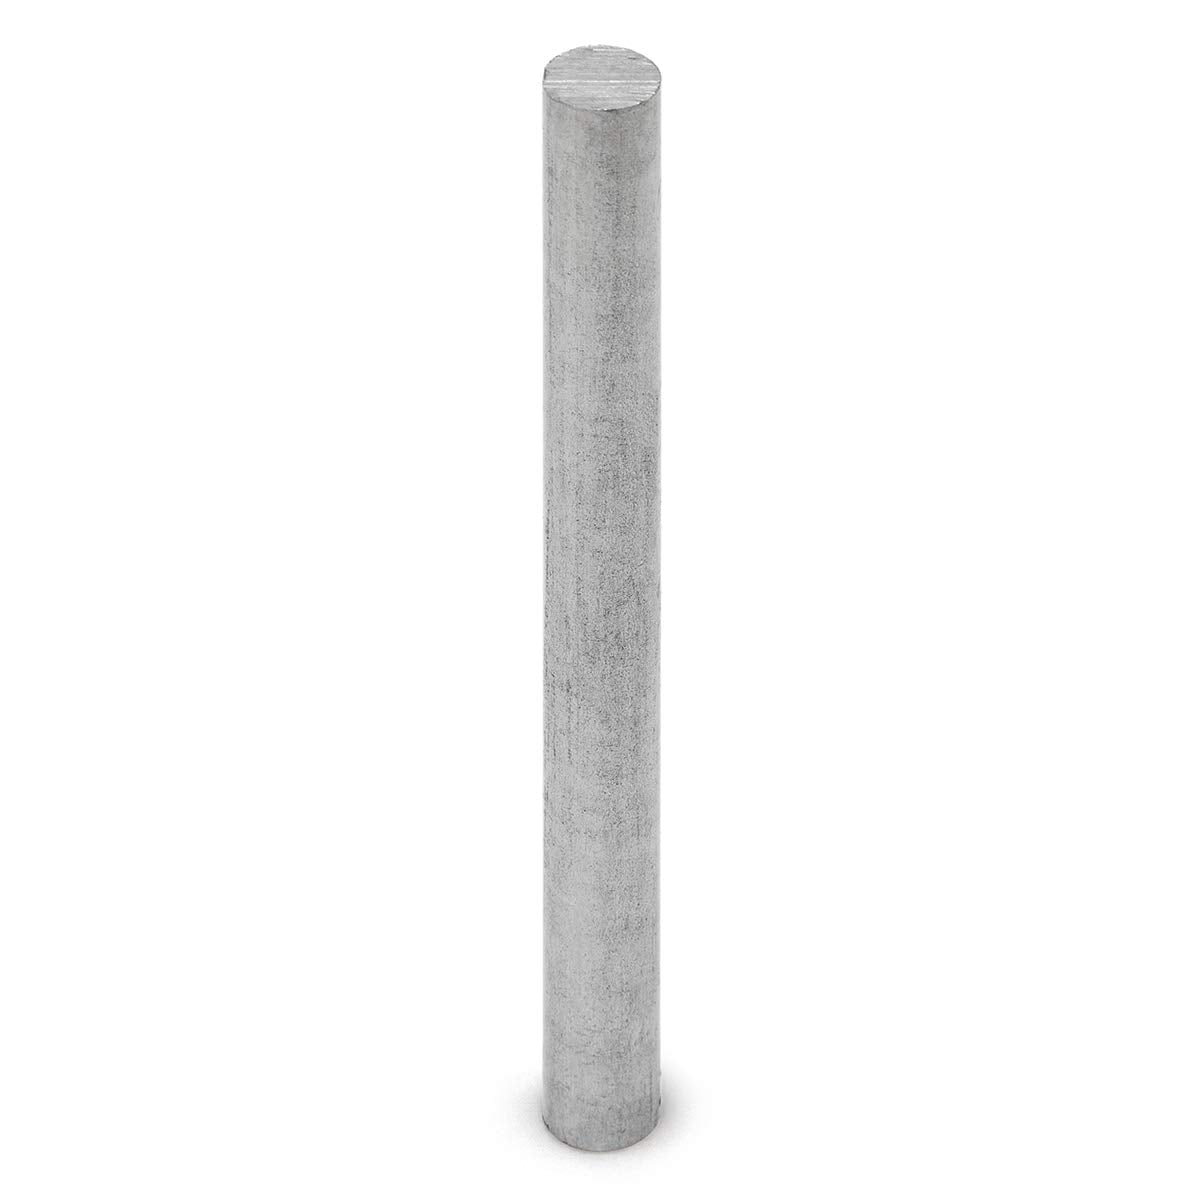 inches 0.5 dia X 6 long Ideal Core for making electromagnets. Soft Iron Rod 